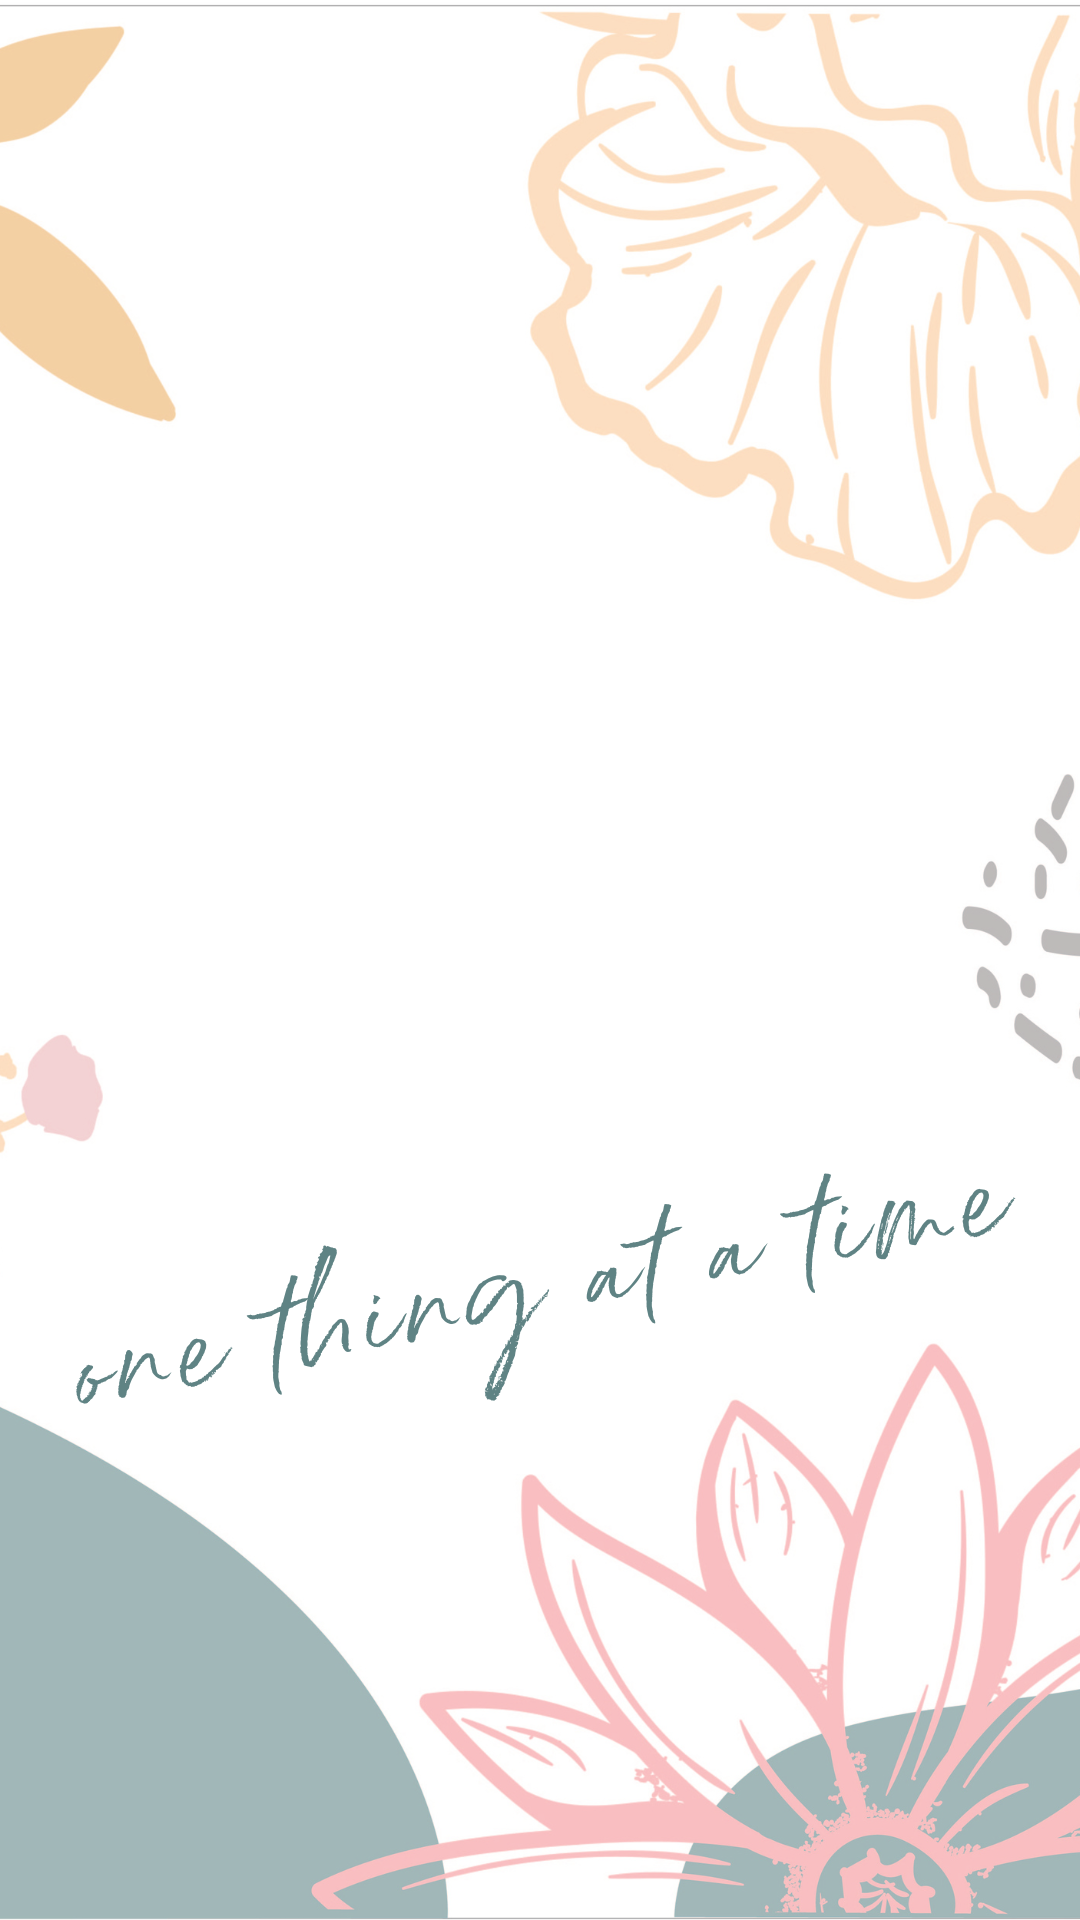 One thing at a time lockscreen